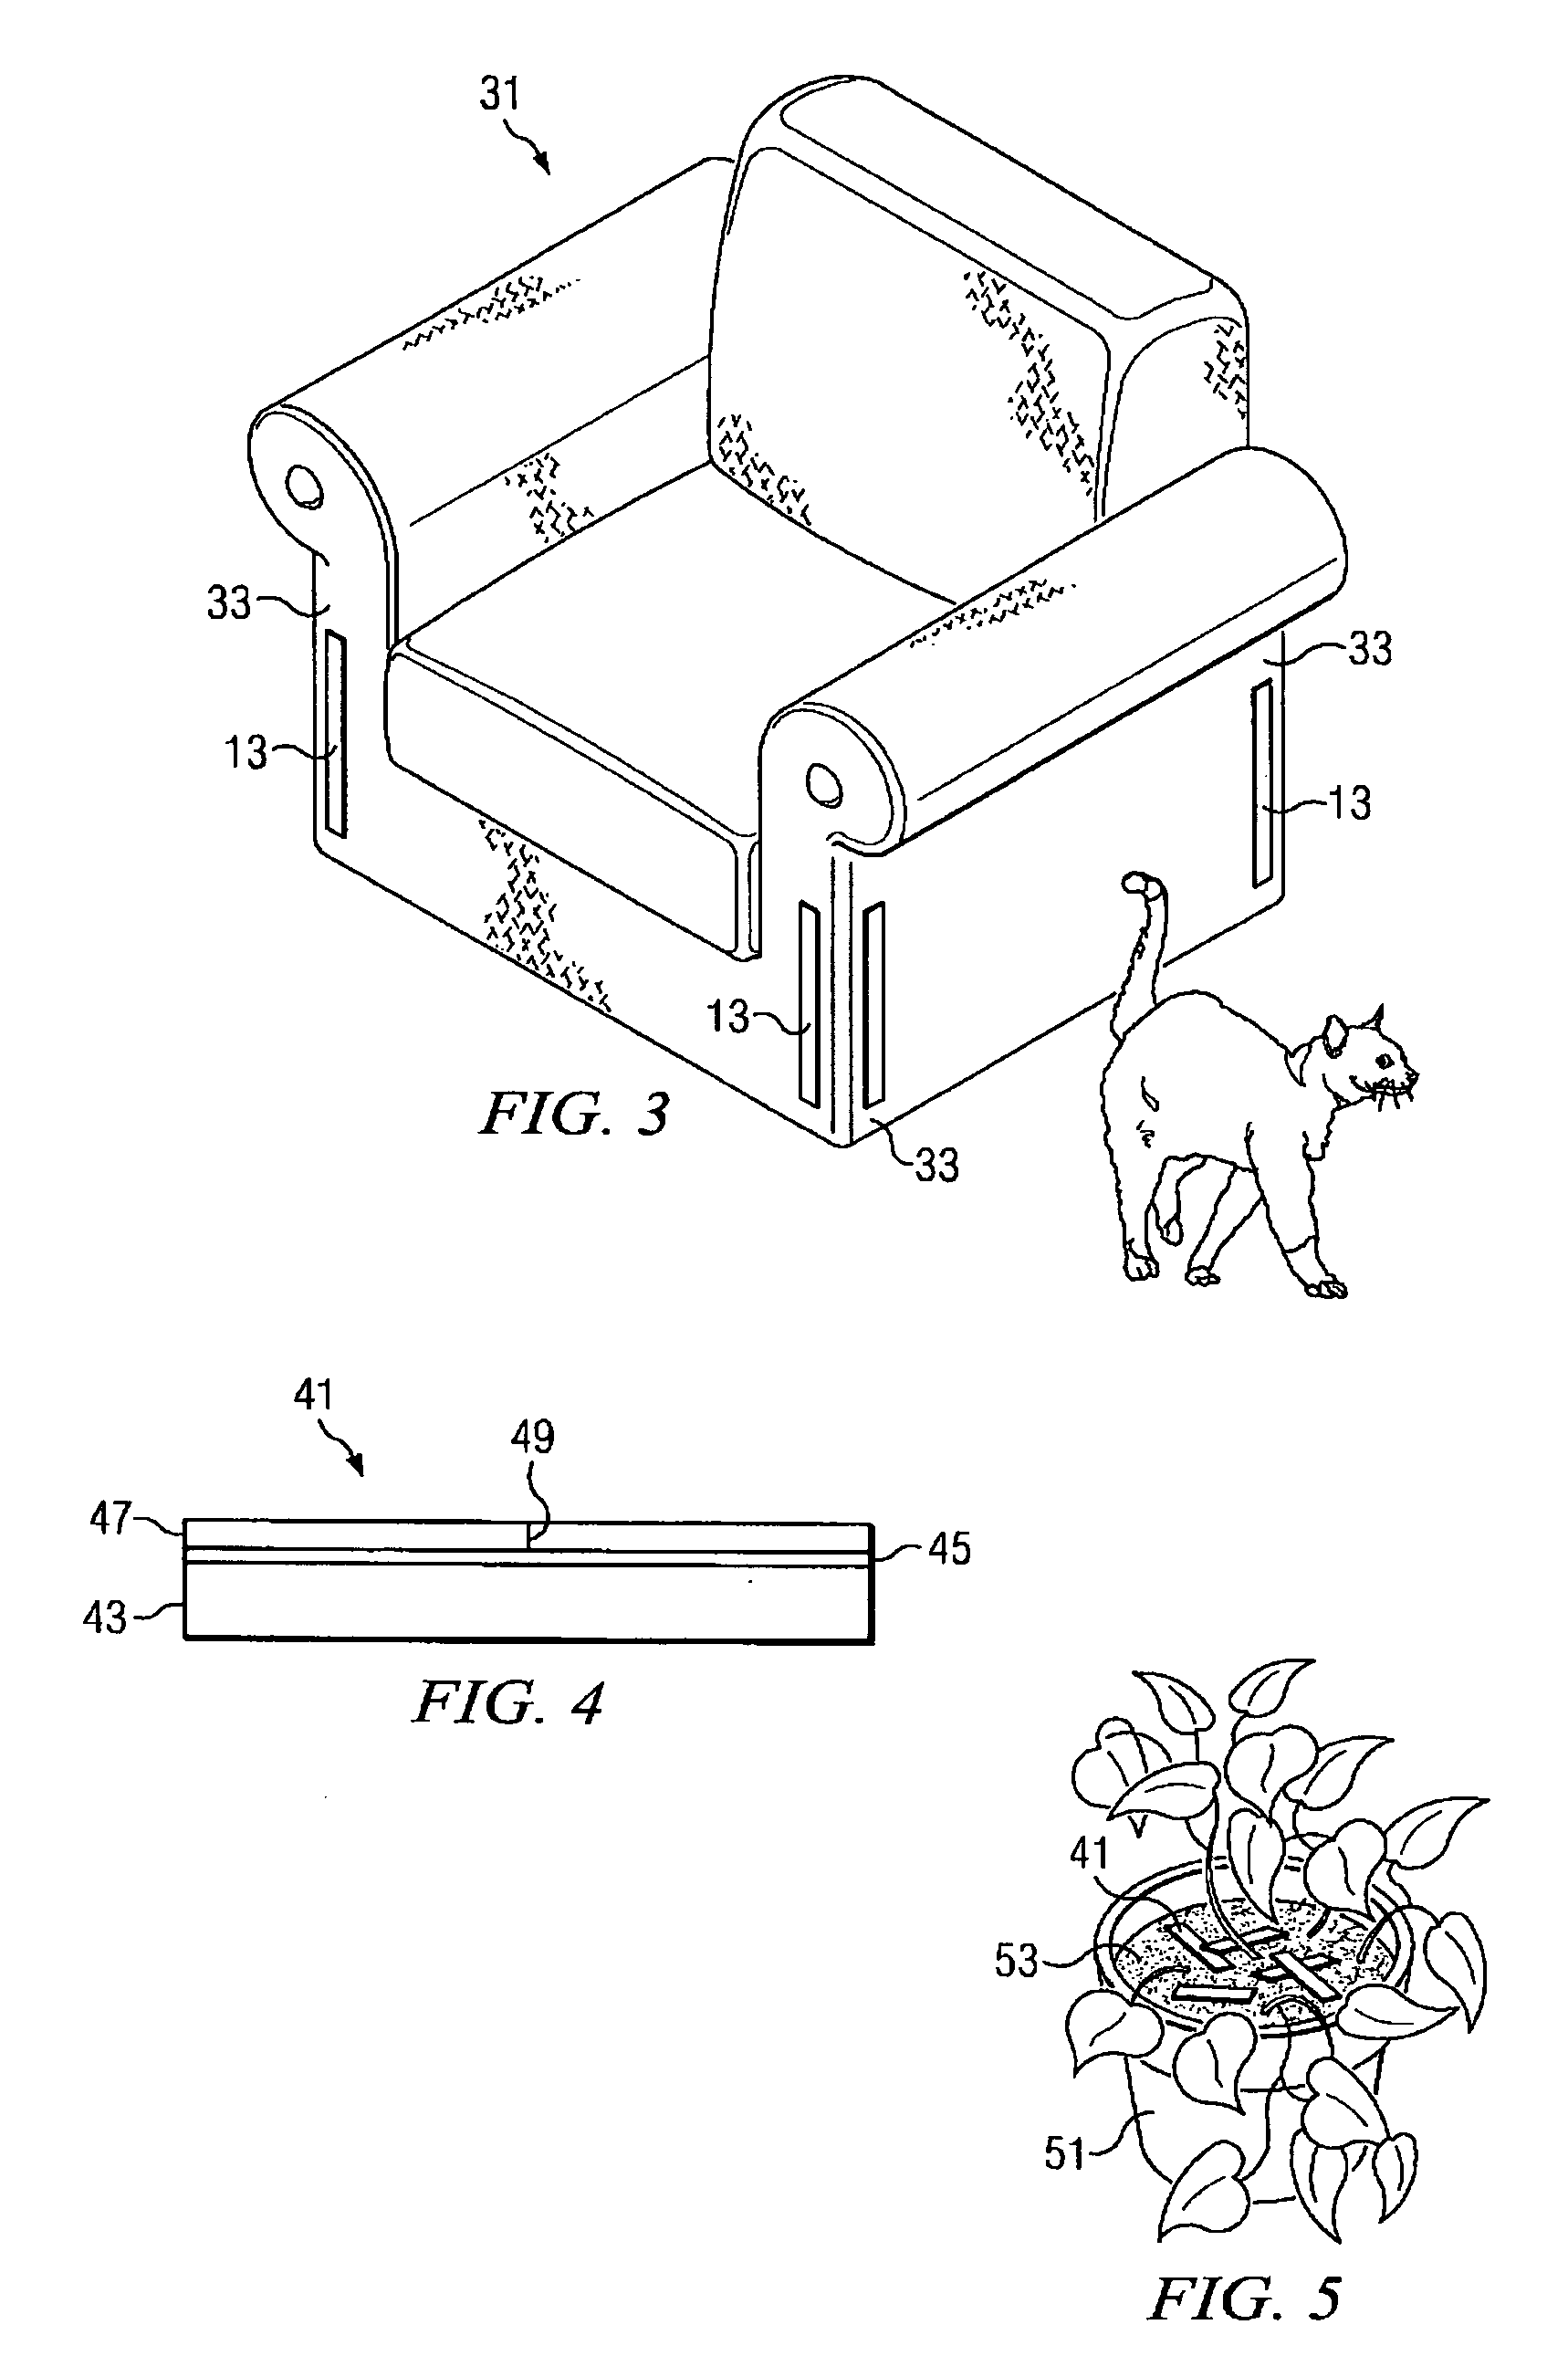 Method and device for preventing pets from clawing home furnishings